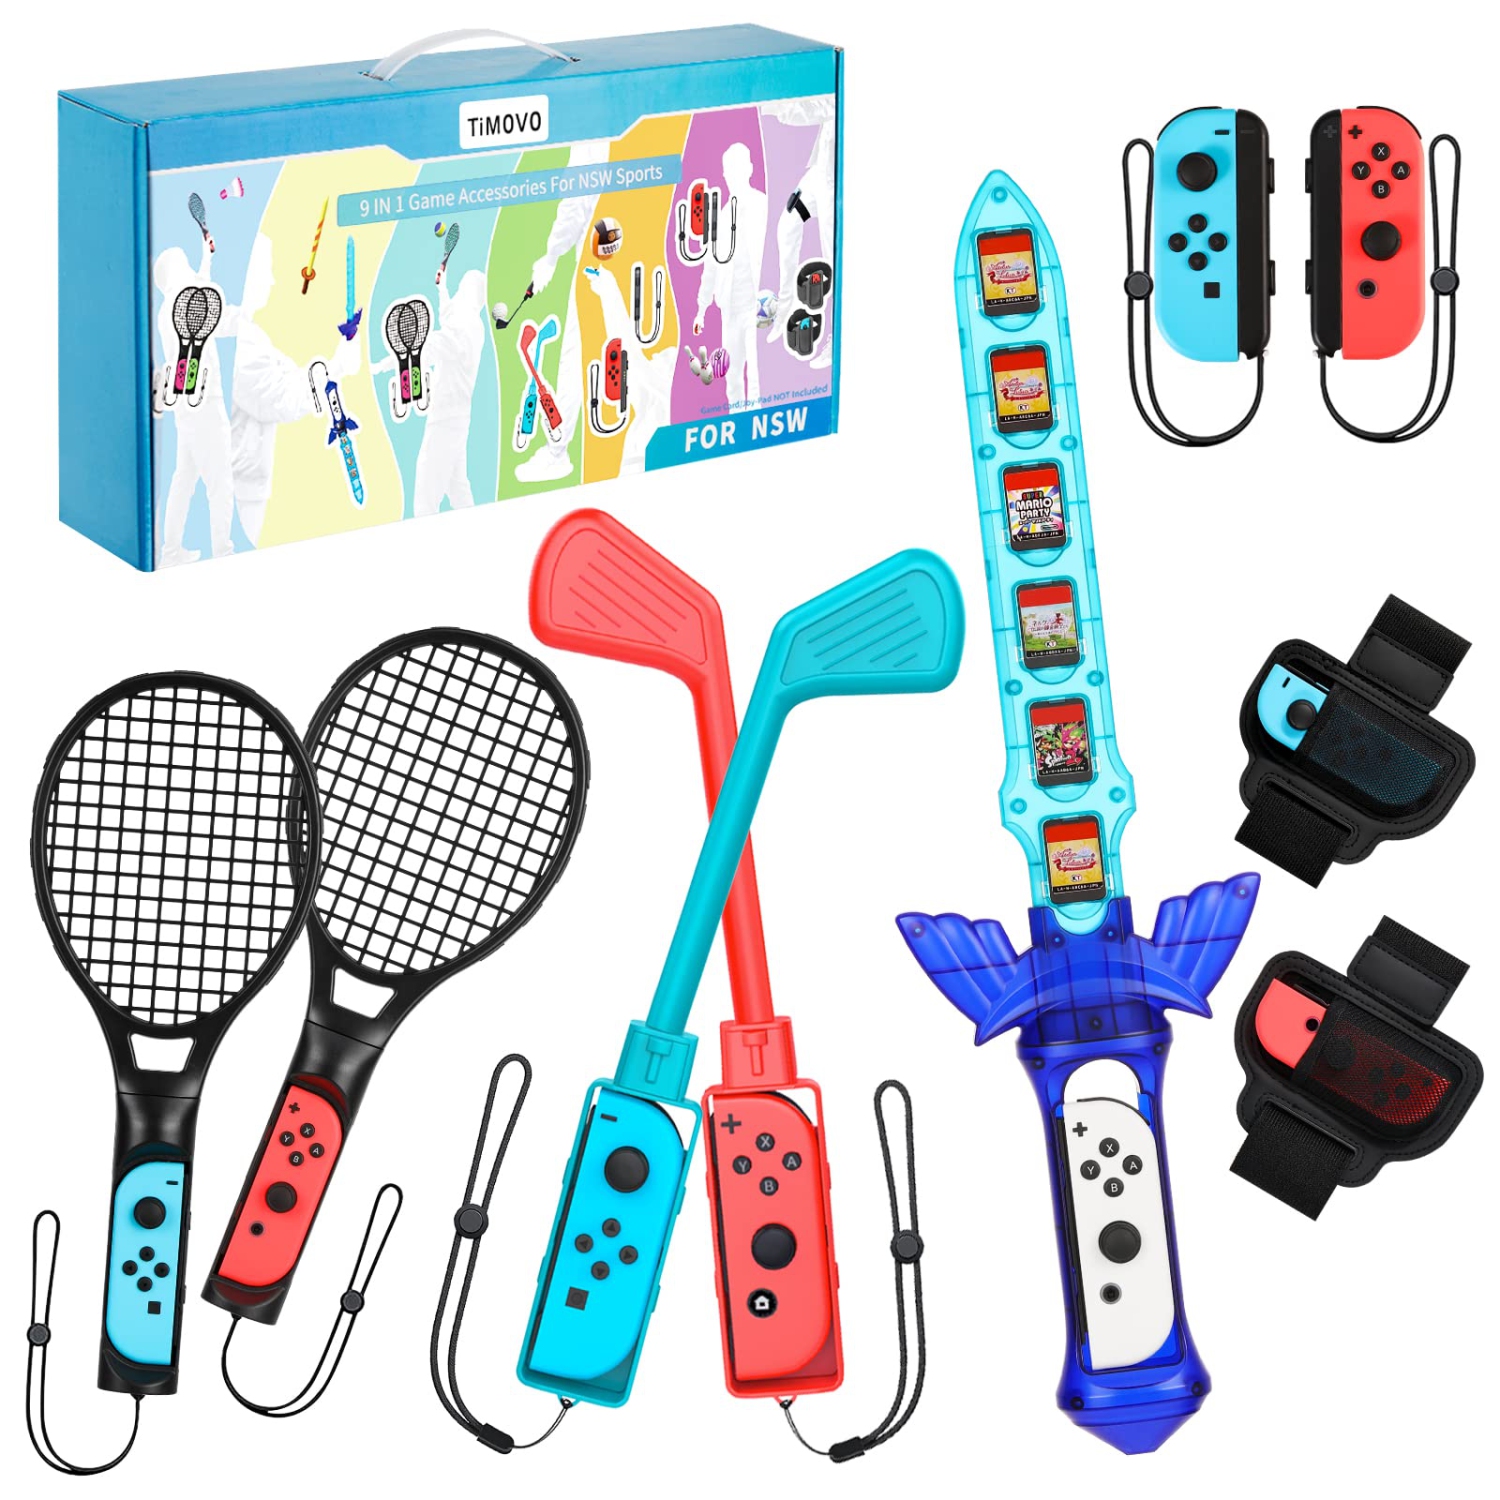 TiMOVO Switch Sports Accessories Bundle for Nintendo Switch/Switch OLED, 9 in 1 Switch Sports Game Kit with Switch Golf Club